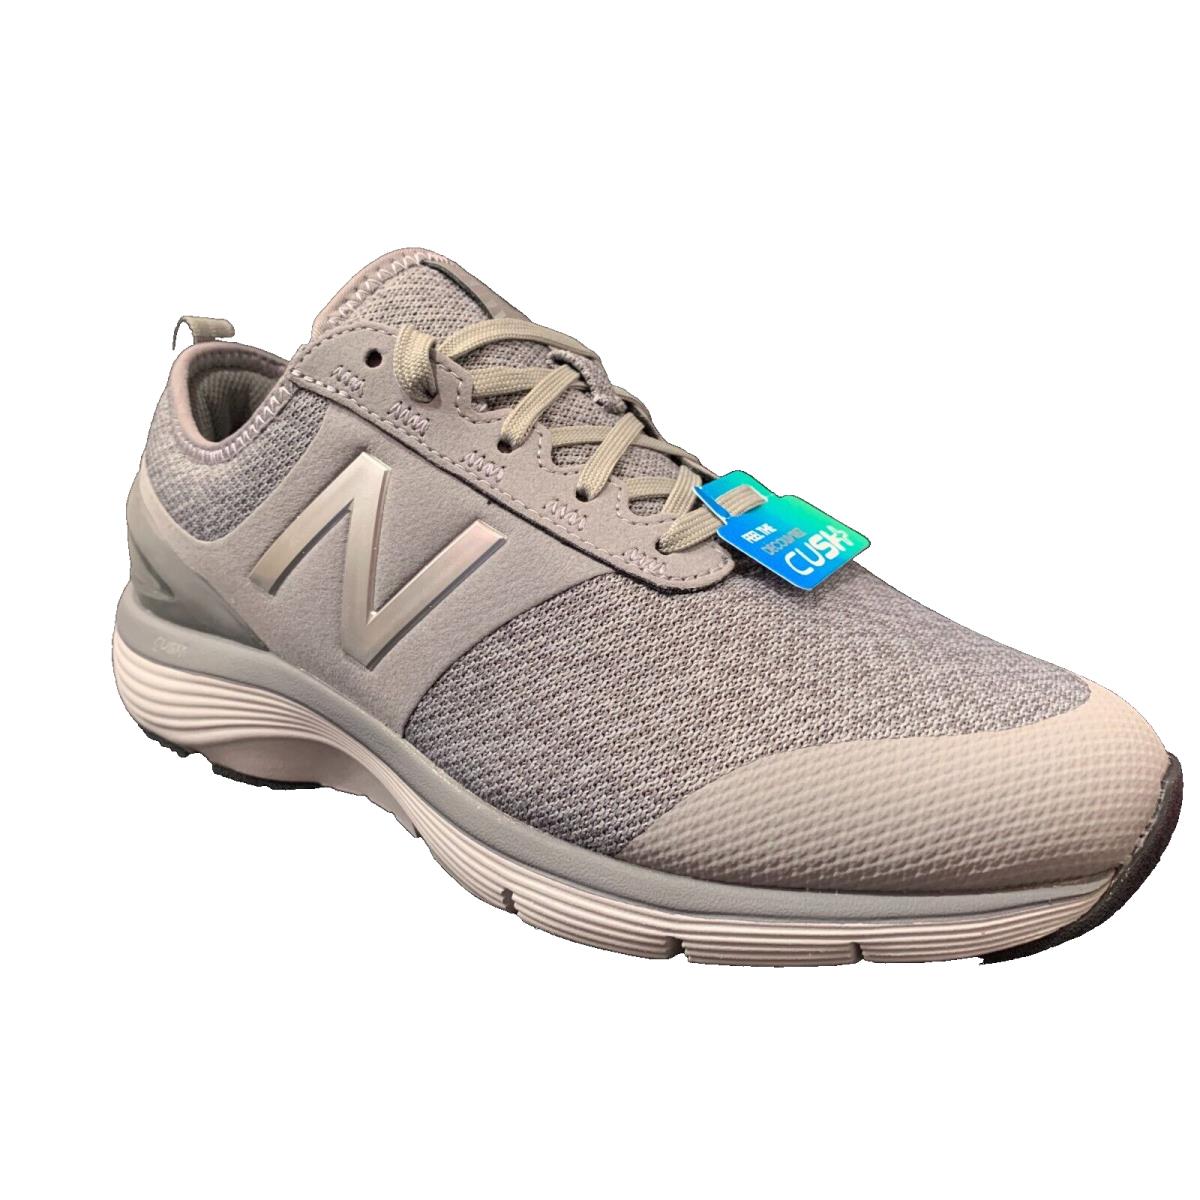 New Balance Mens MW955 GR2 Athletic Shoes Gey /silver Sneakers Shoe Width - Wide